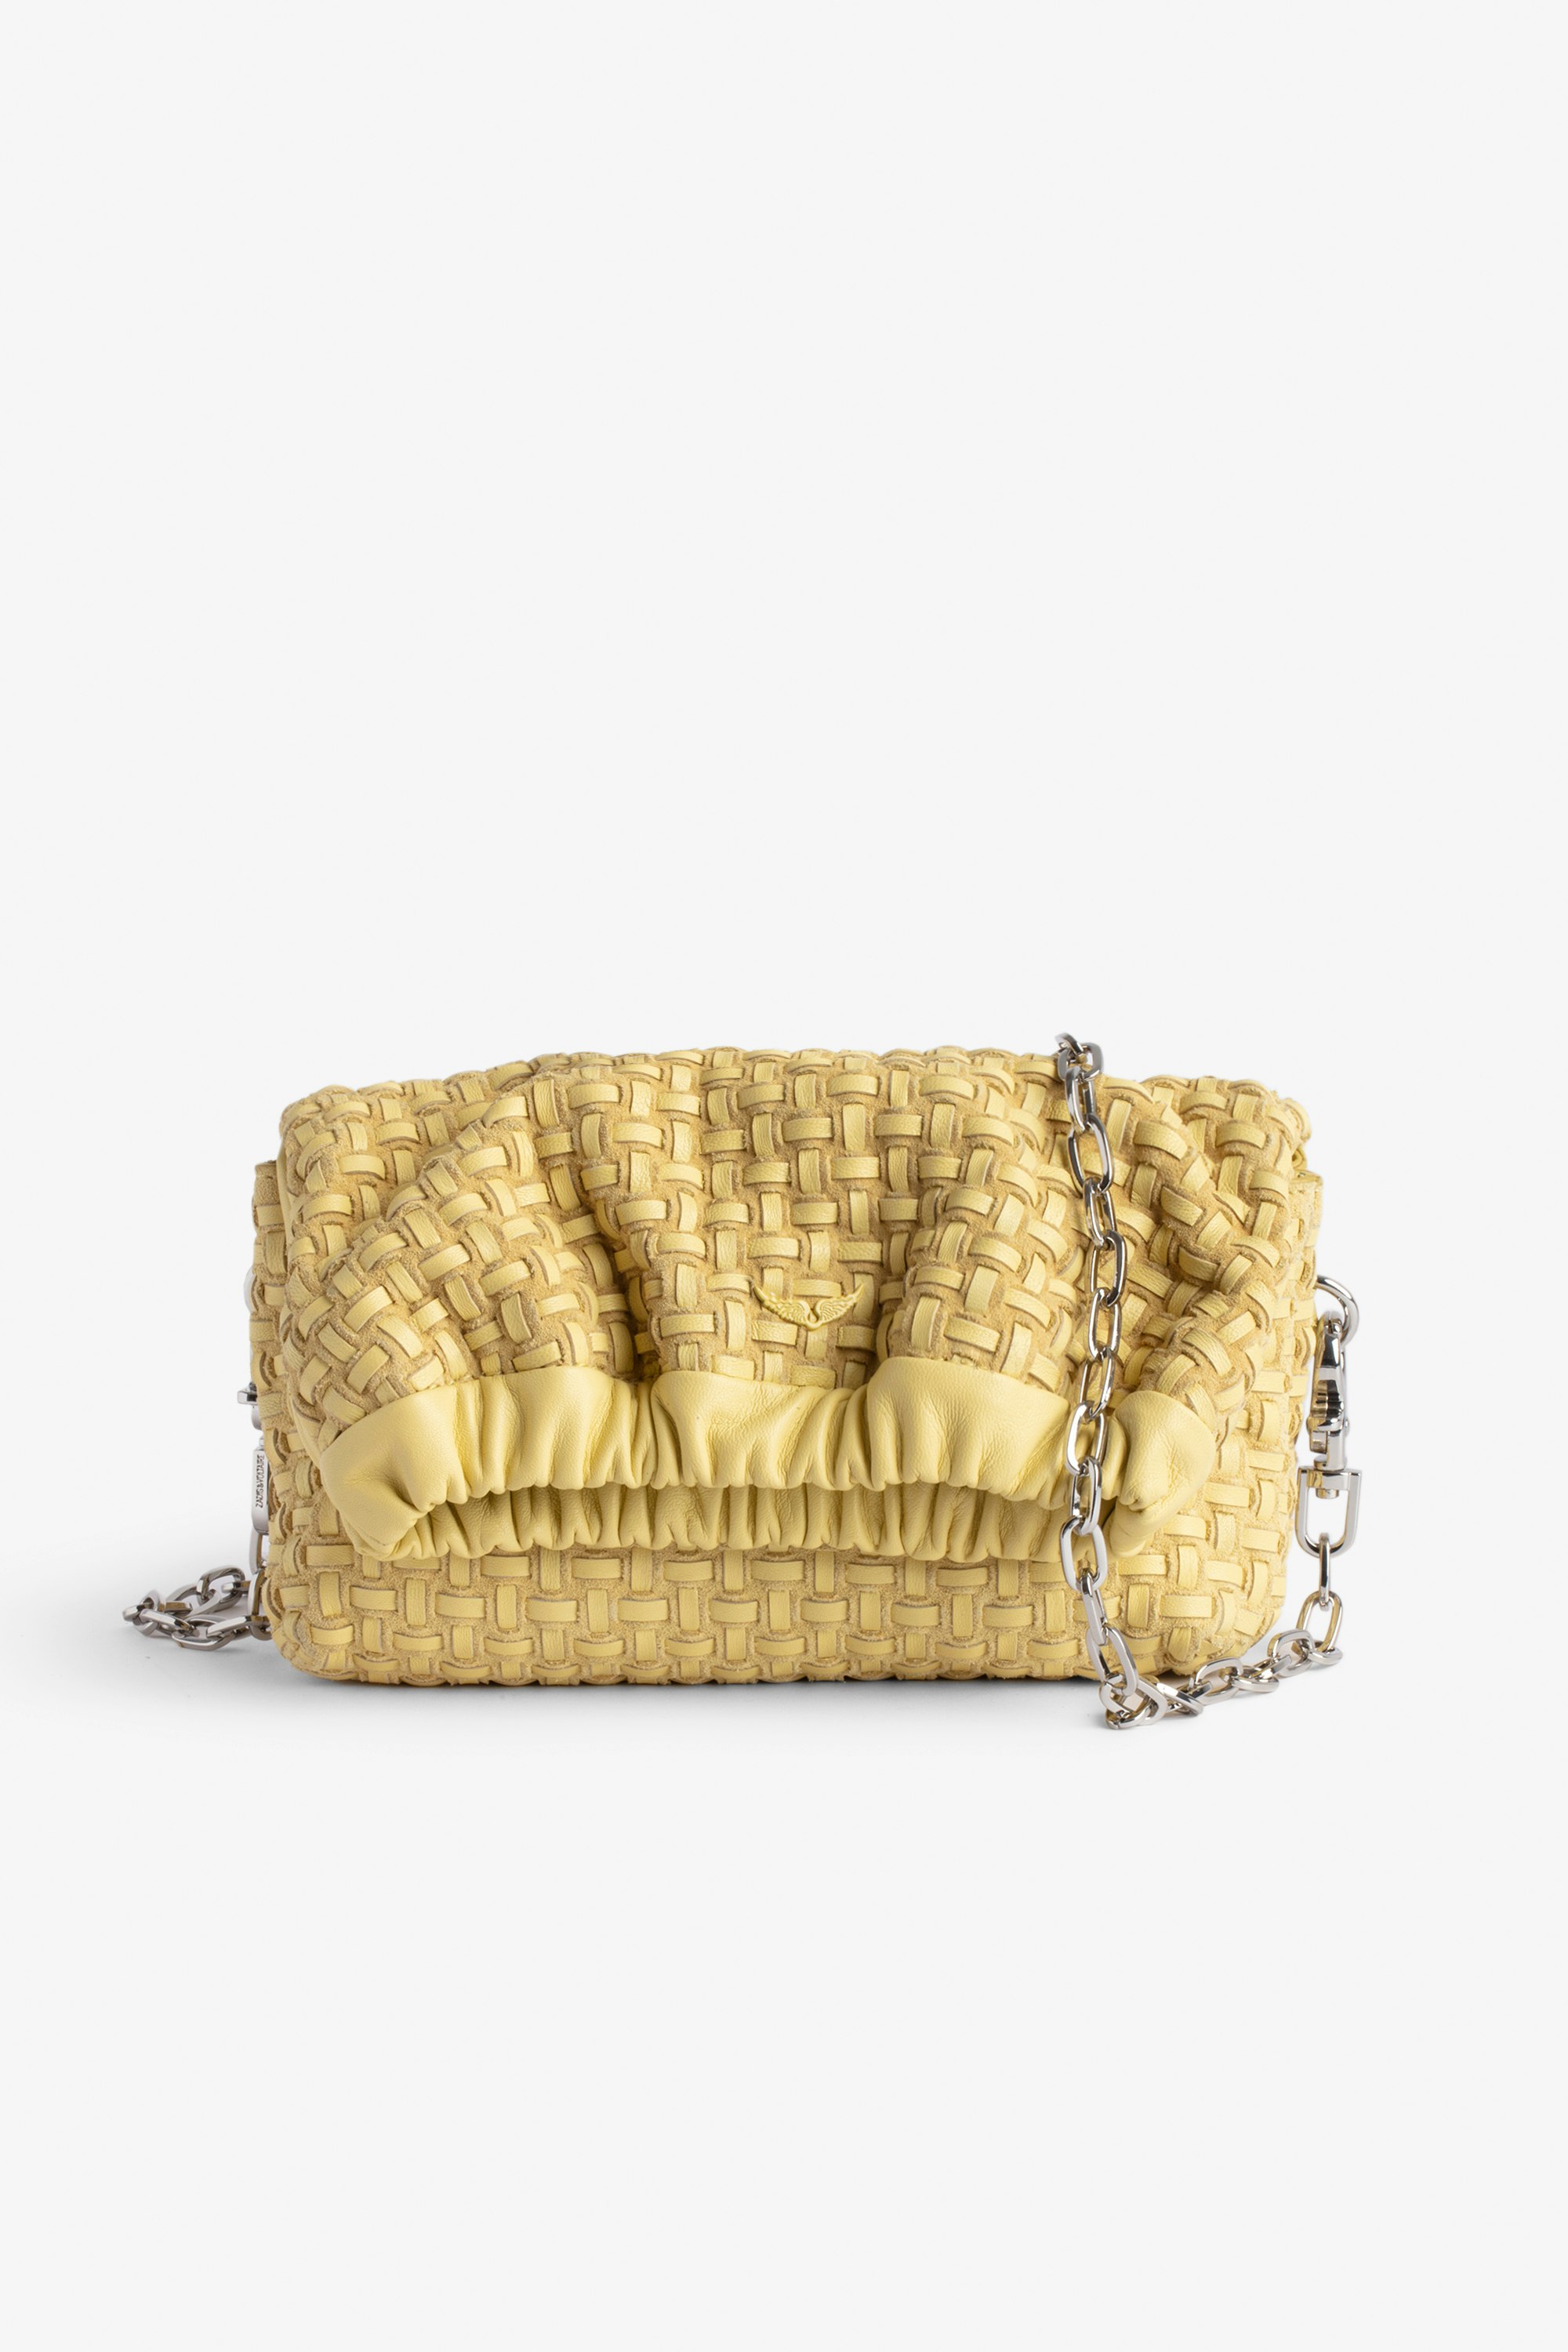 Rockyssime XS Bag Women’s small bag in yellow latticework leather with gathered closure and metal chain